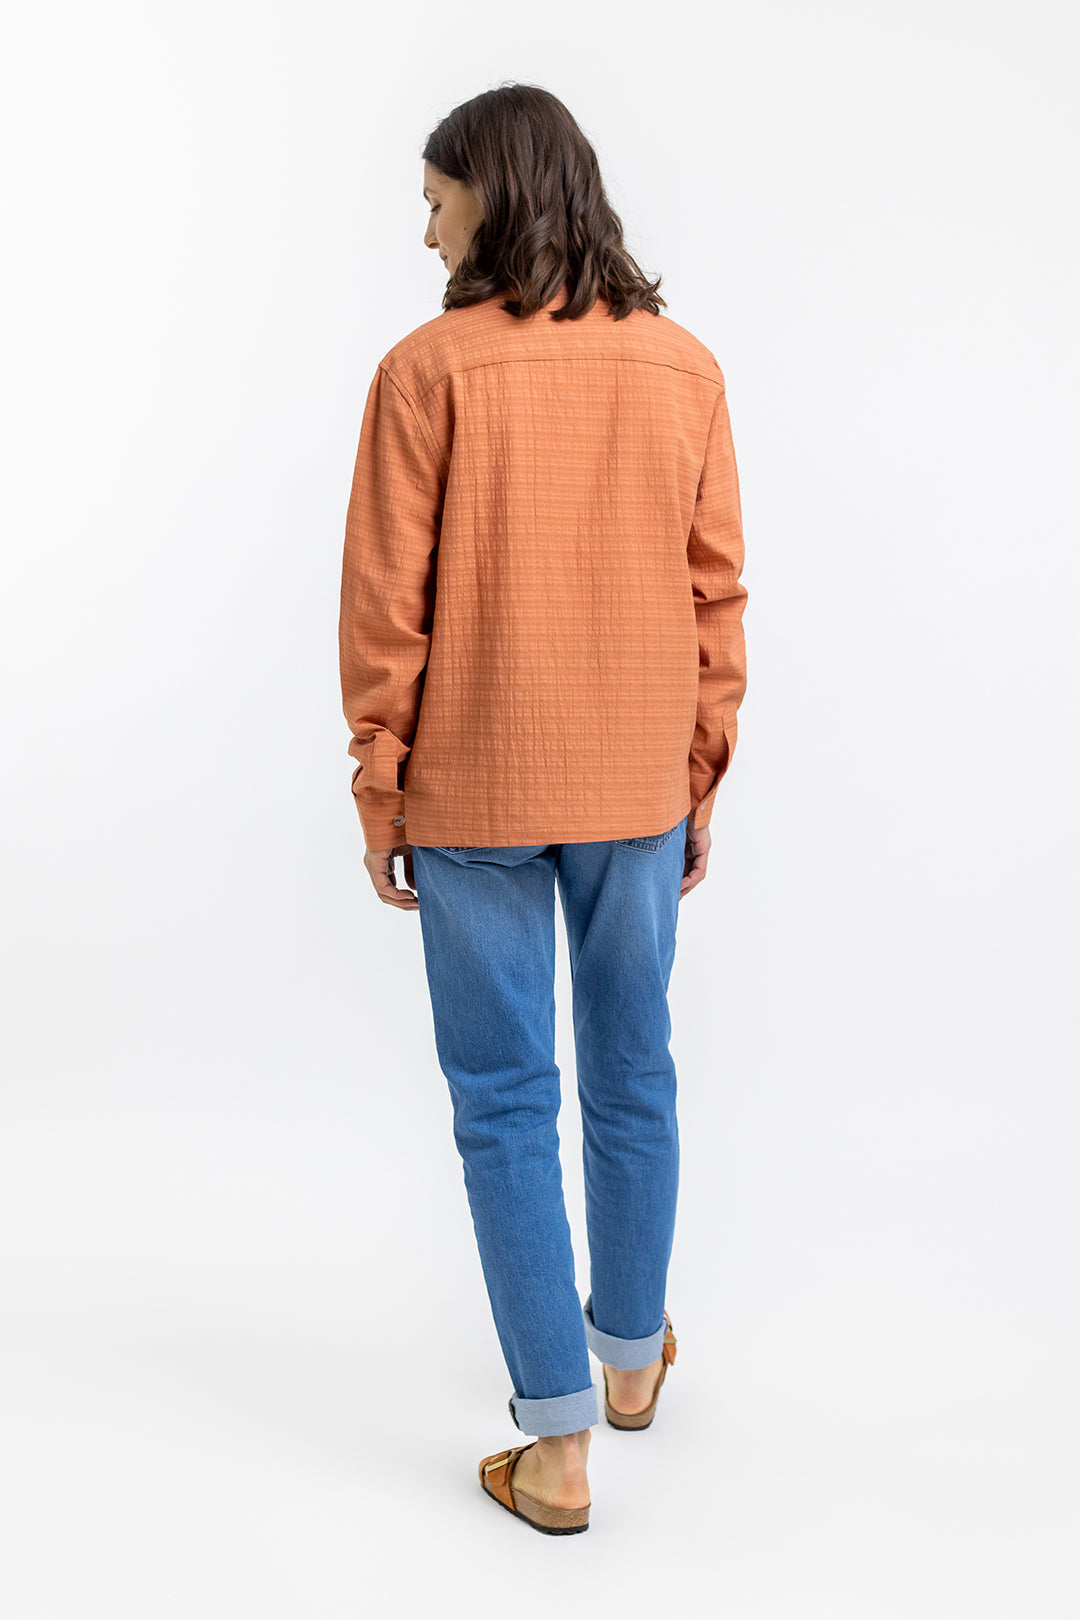 Orange Leisure shirt made from 100% organic cotton from Rotholz